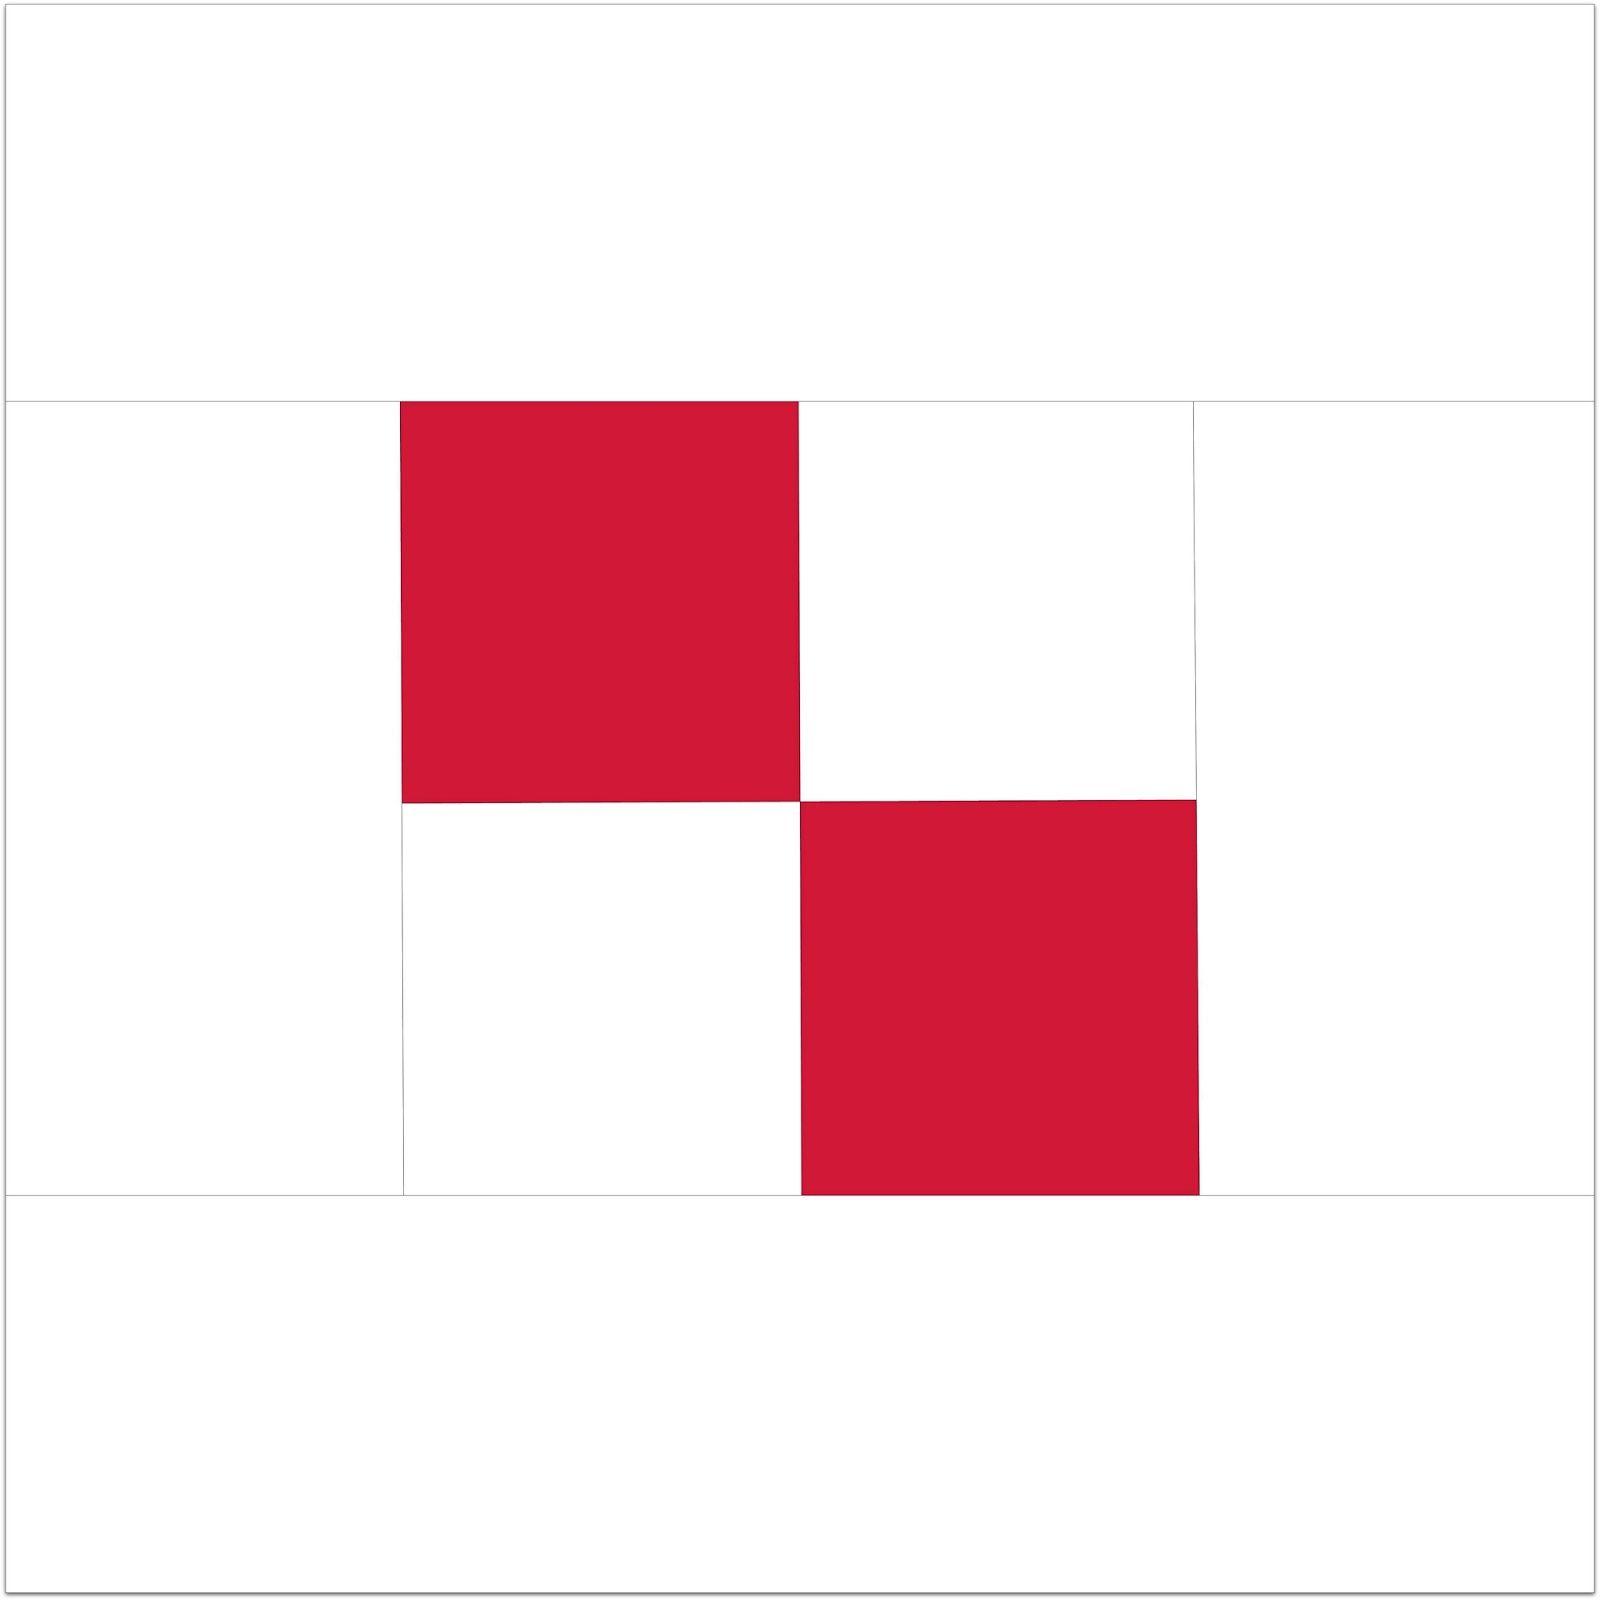 Two Red Squares Logo - 30 quilt blocks in 30 days